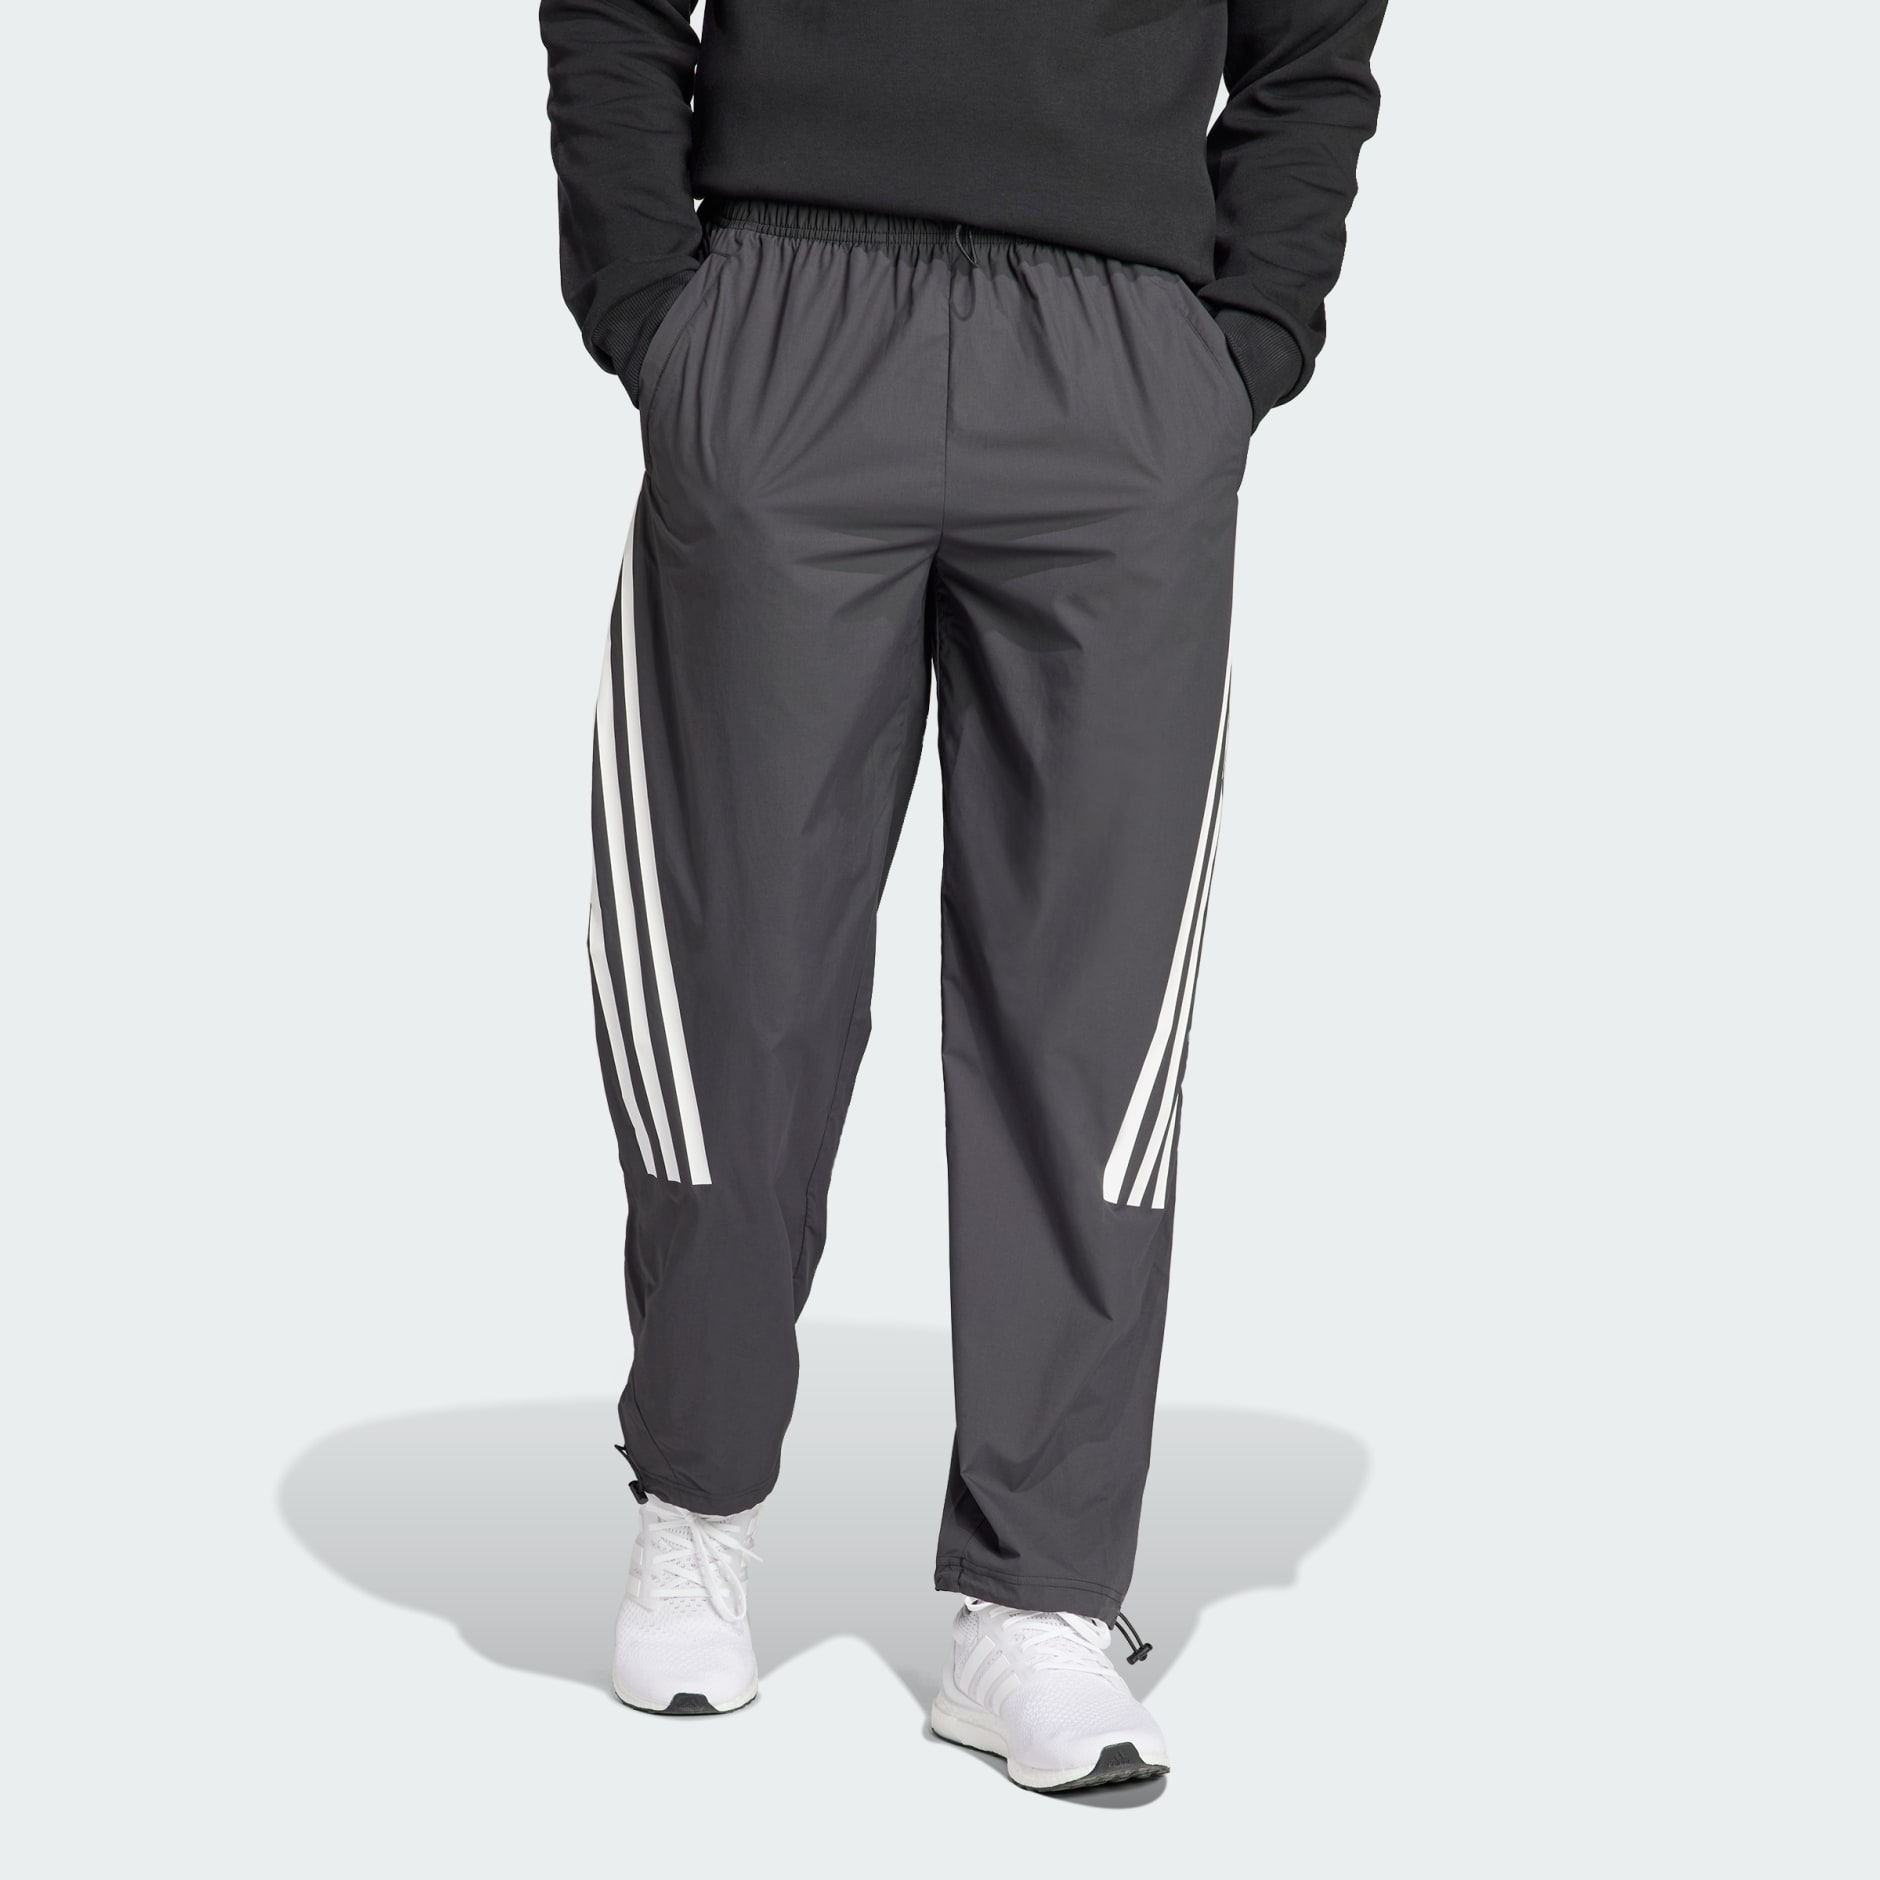 Buy ADIDAS Black Solid Polyester Blend Regular Fit Boys Pants | Shoppers  Stop